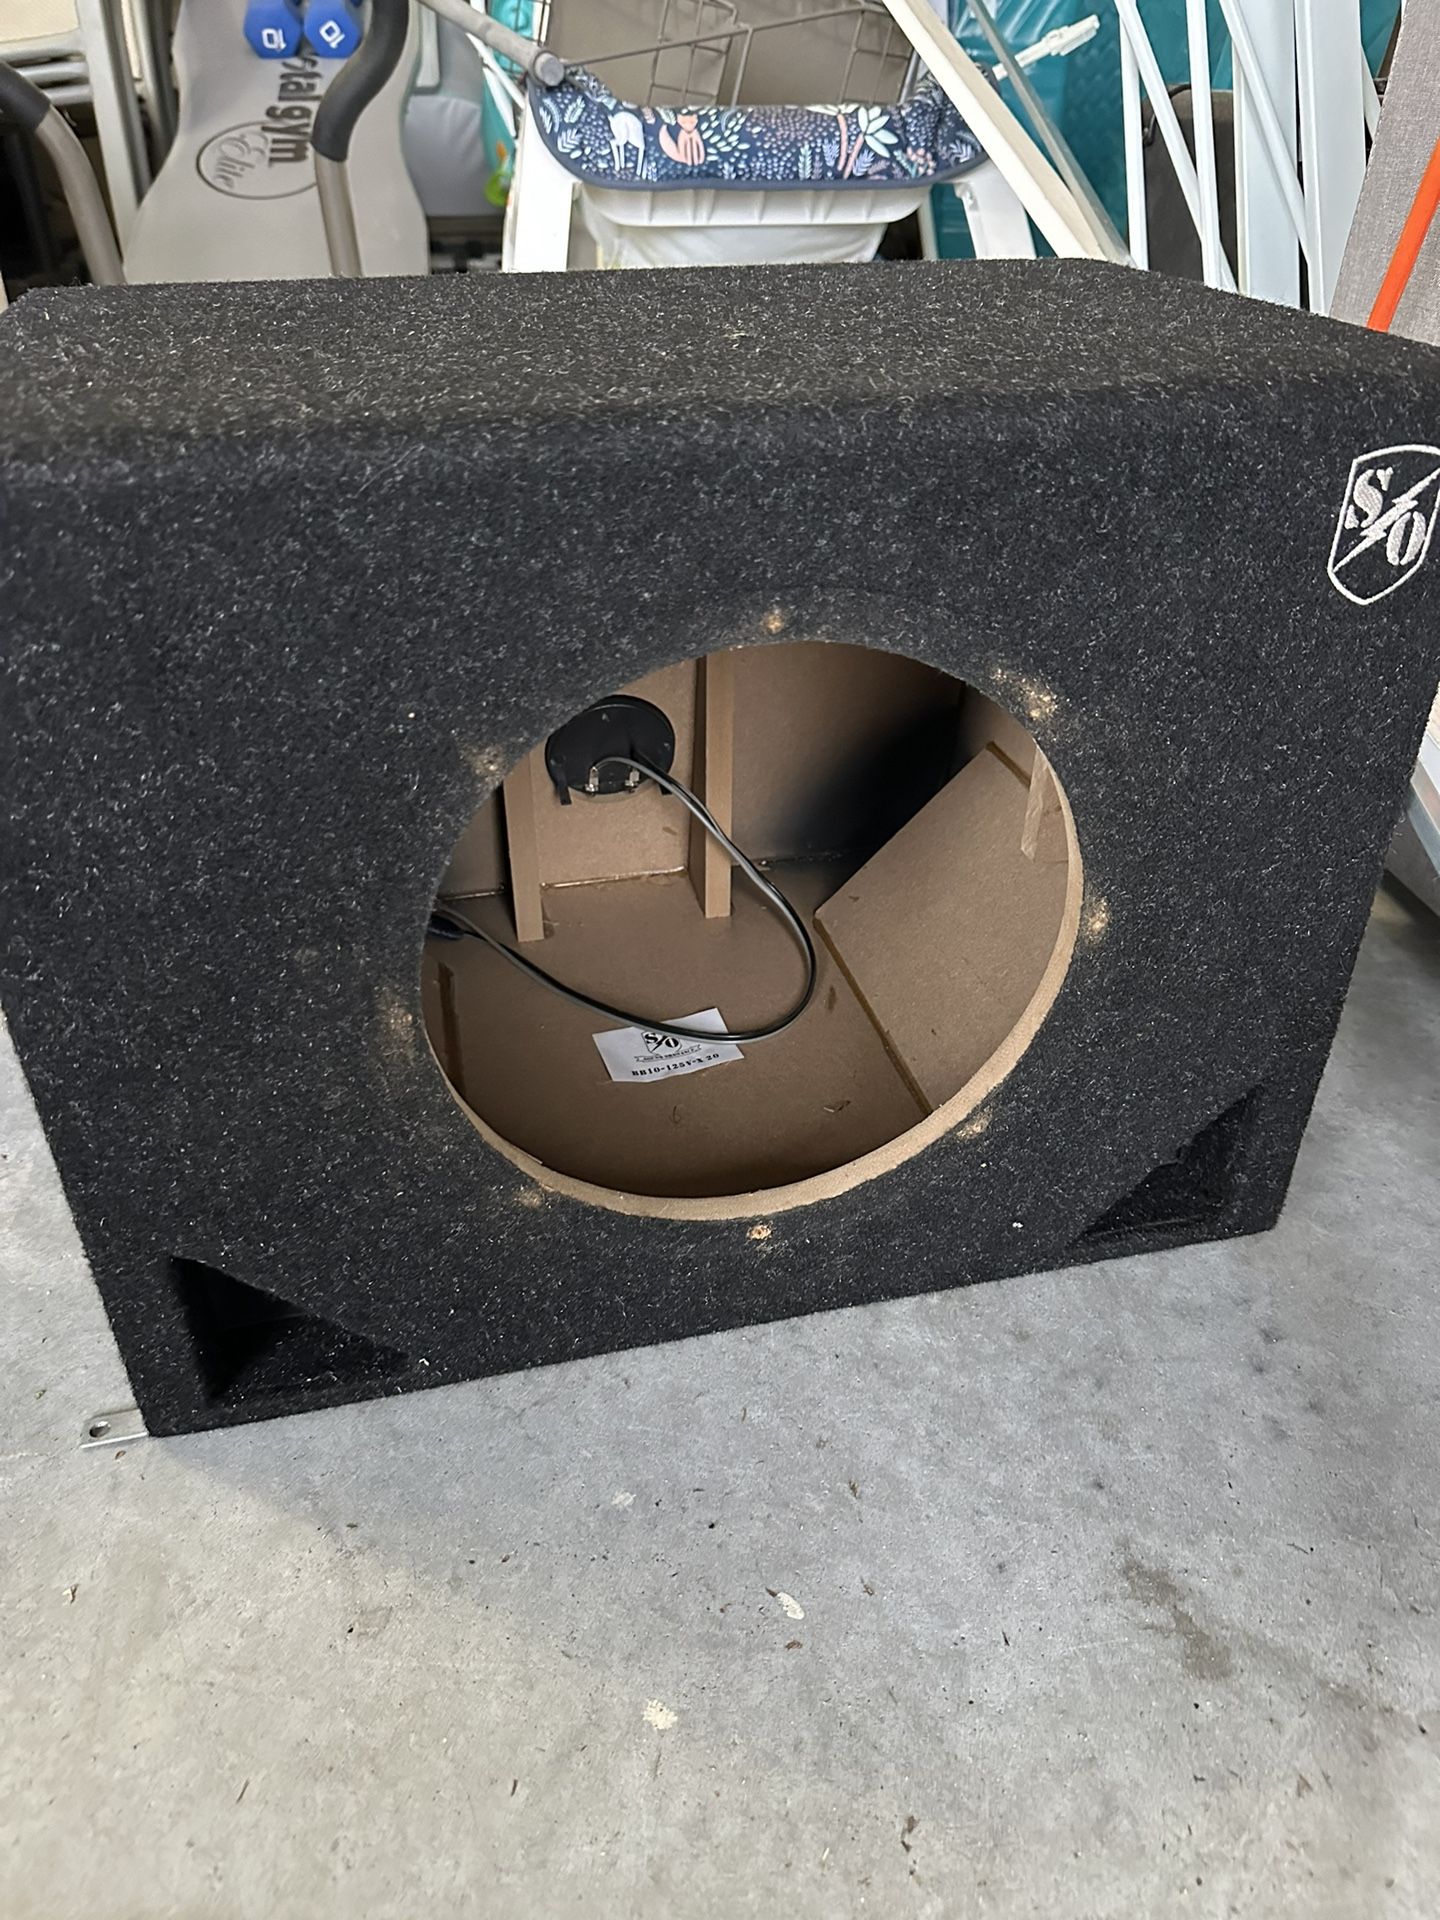 10 Inch Ported Subwoofer Box